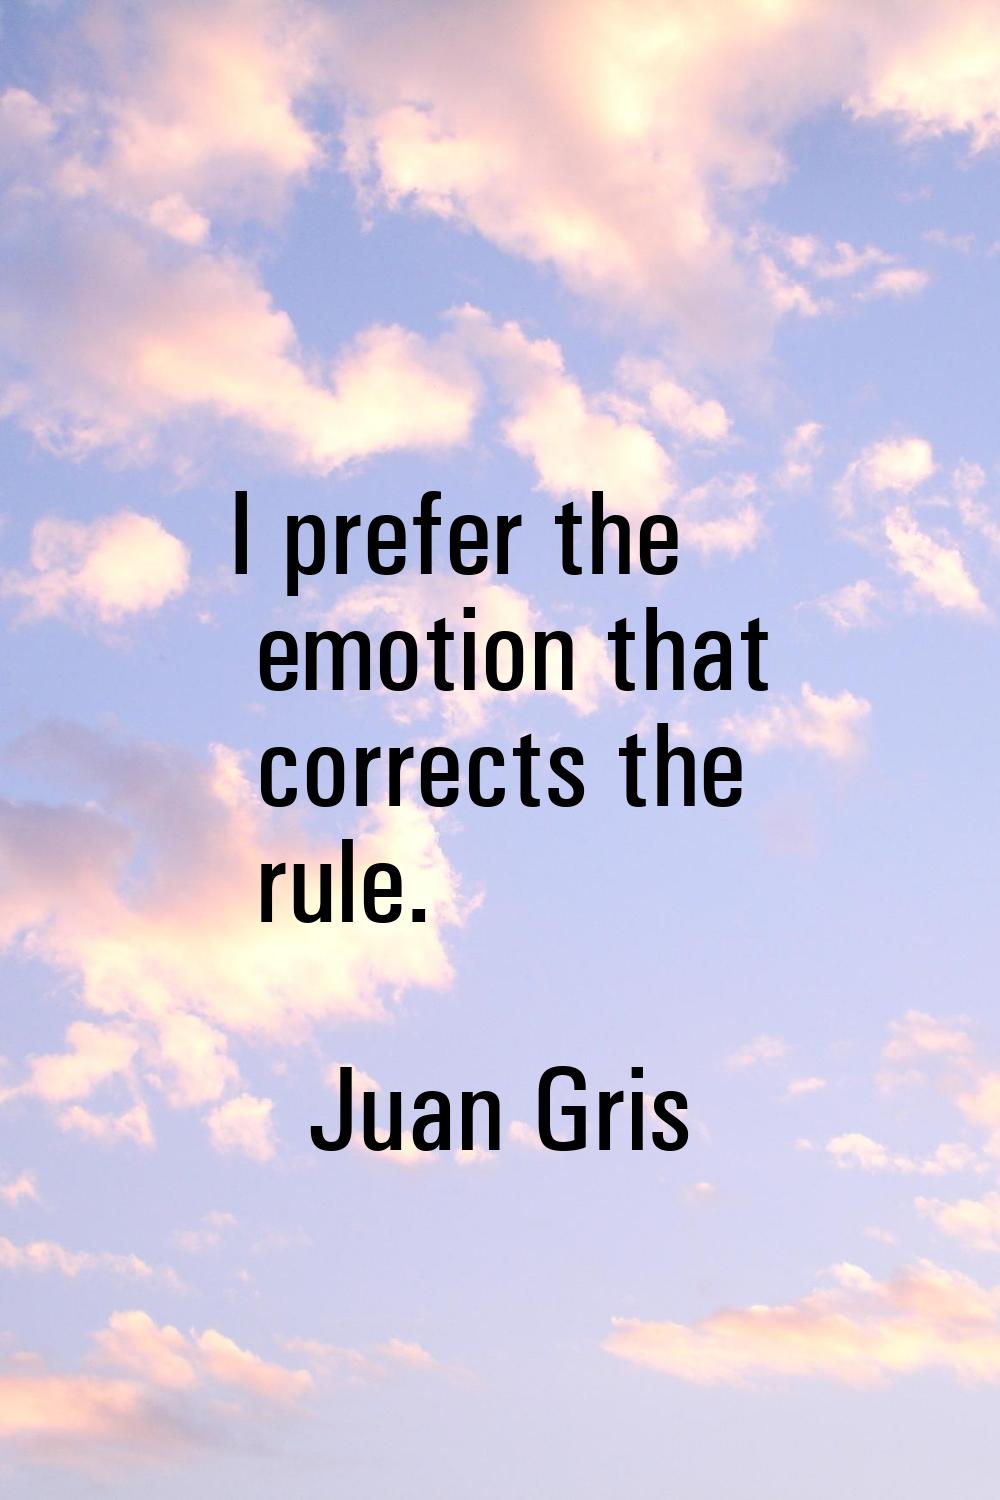 I prefer the emotion that corrects the rule.